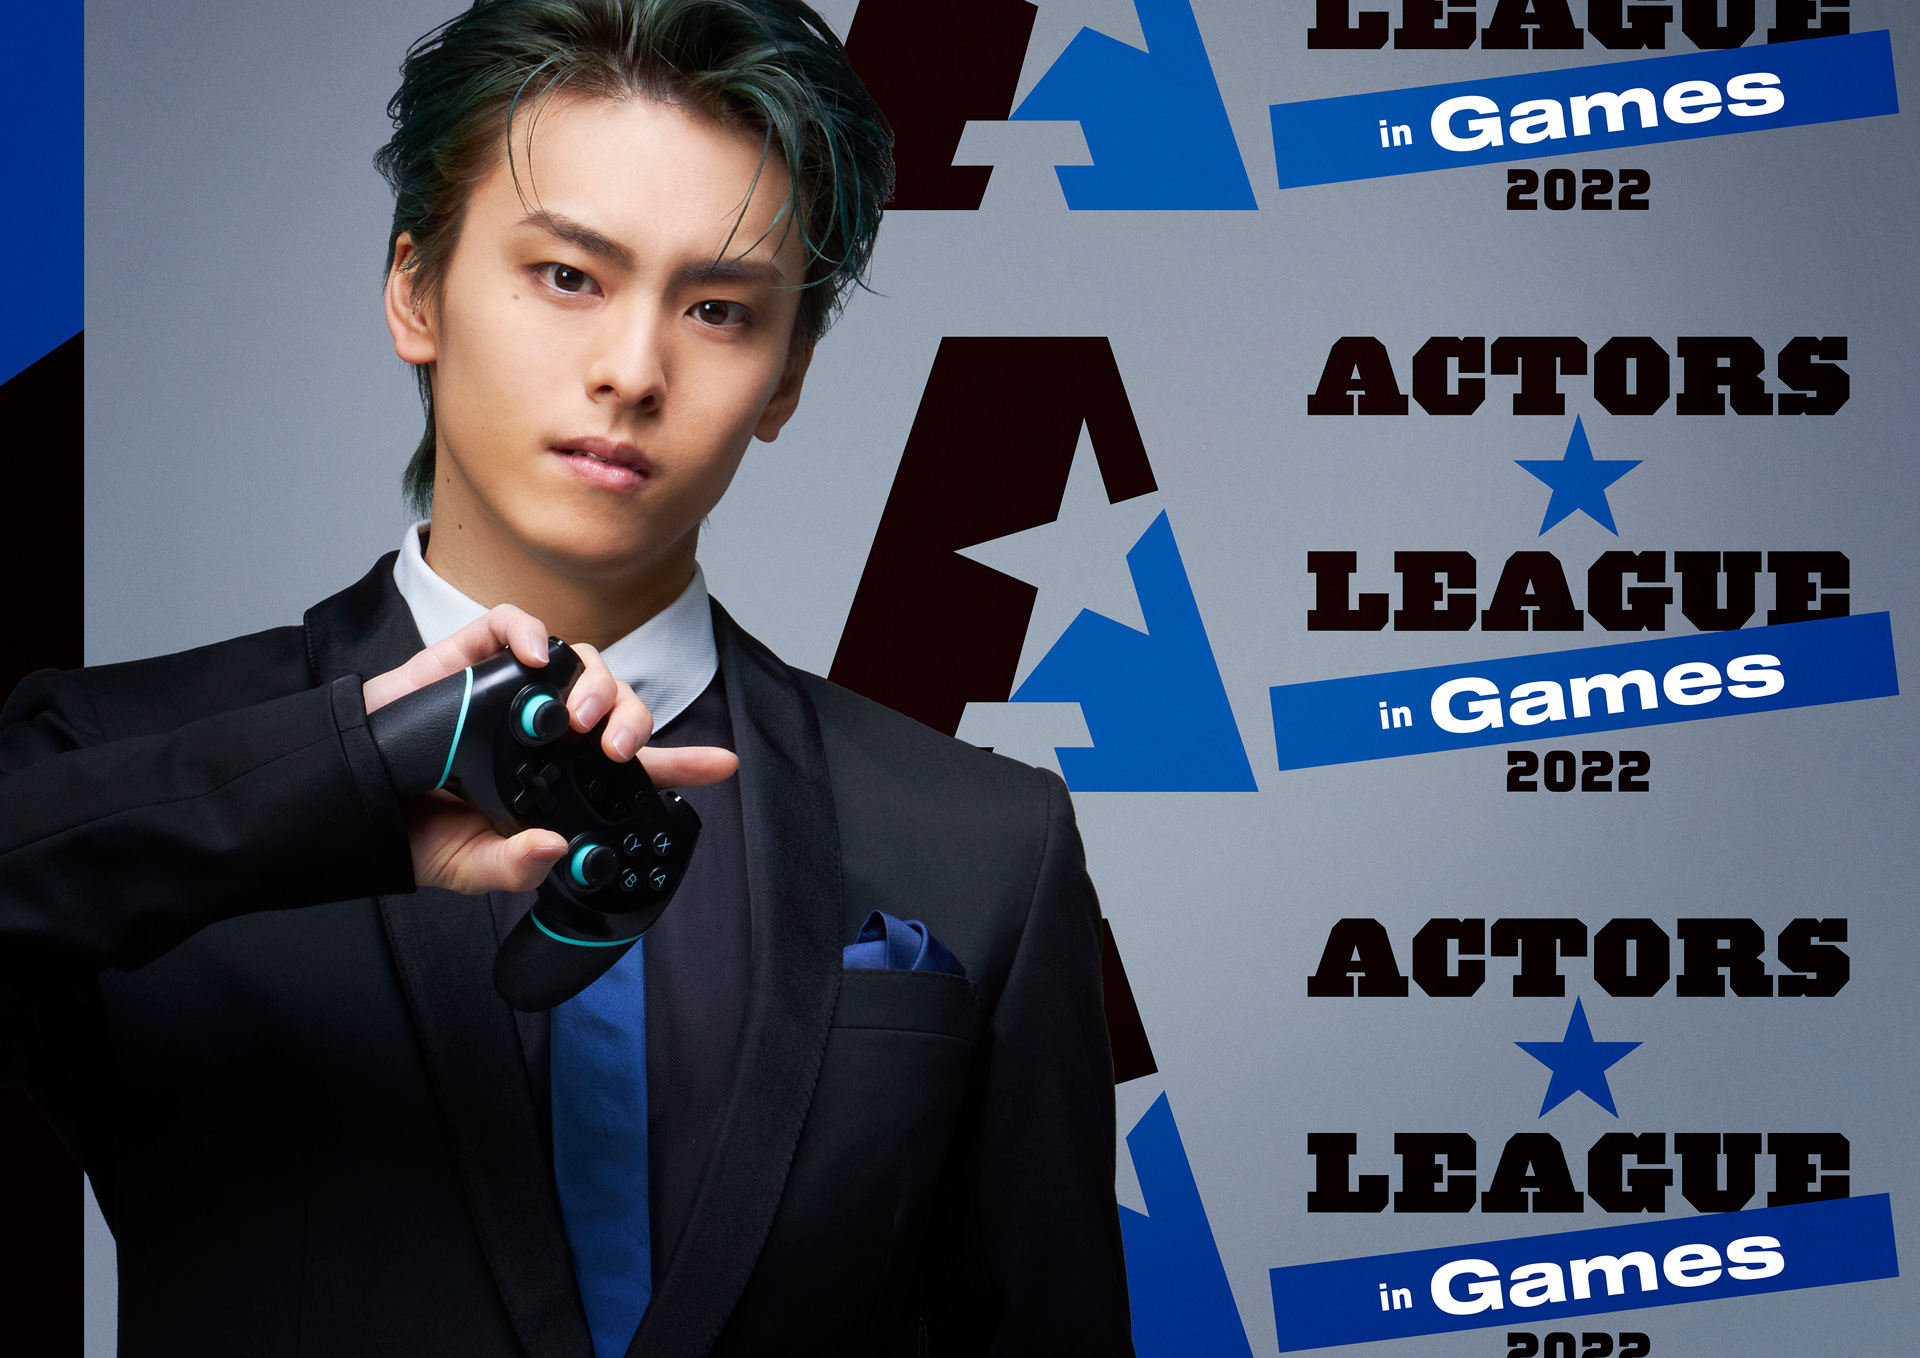 ACTORS☆LEAGUE in Games Blu-ray アクターズリーグ 人気度ランキング 